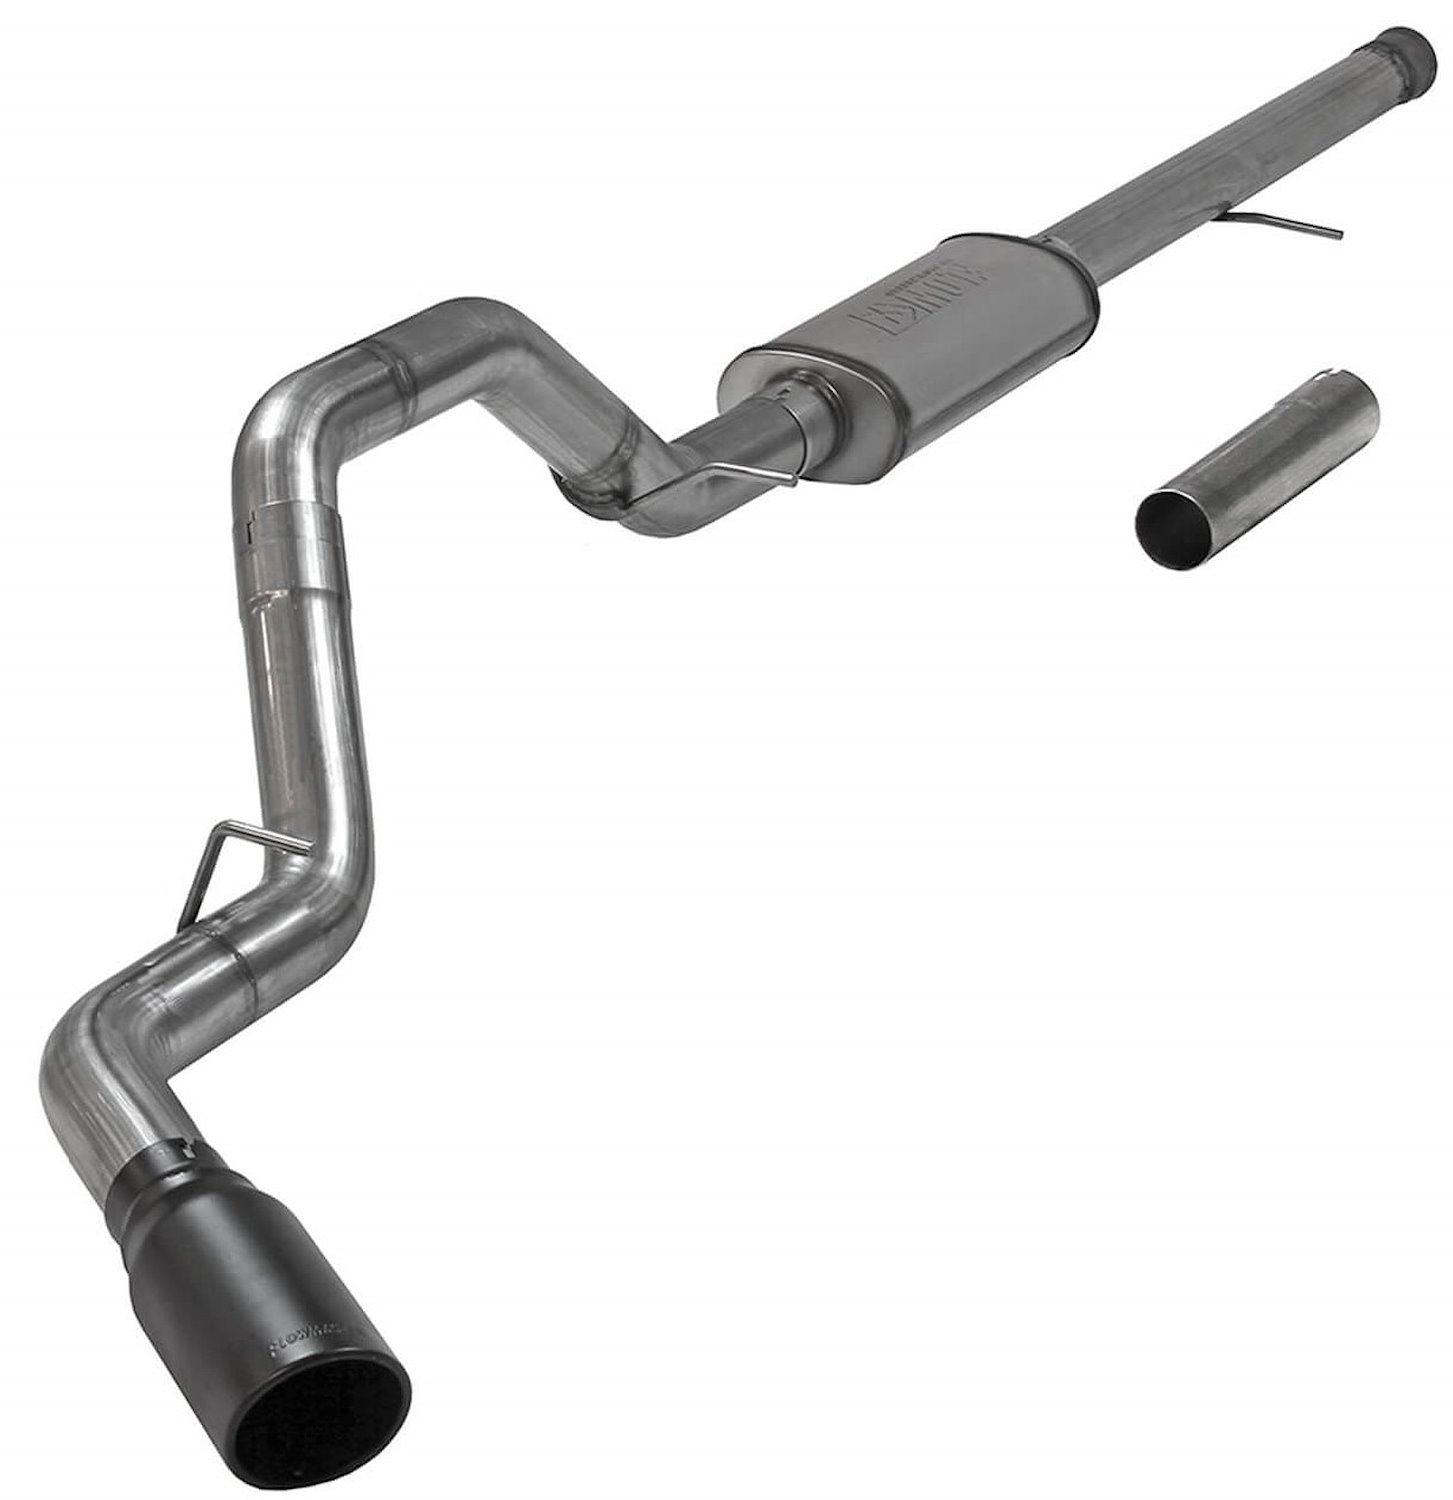 FlowFX Cat-Back Exhaust System for 2011-2018 Chevy Silverado, GMC Sierra 1500 Pickup Truck 6.2L (Crew, Double Cabs)